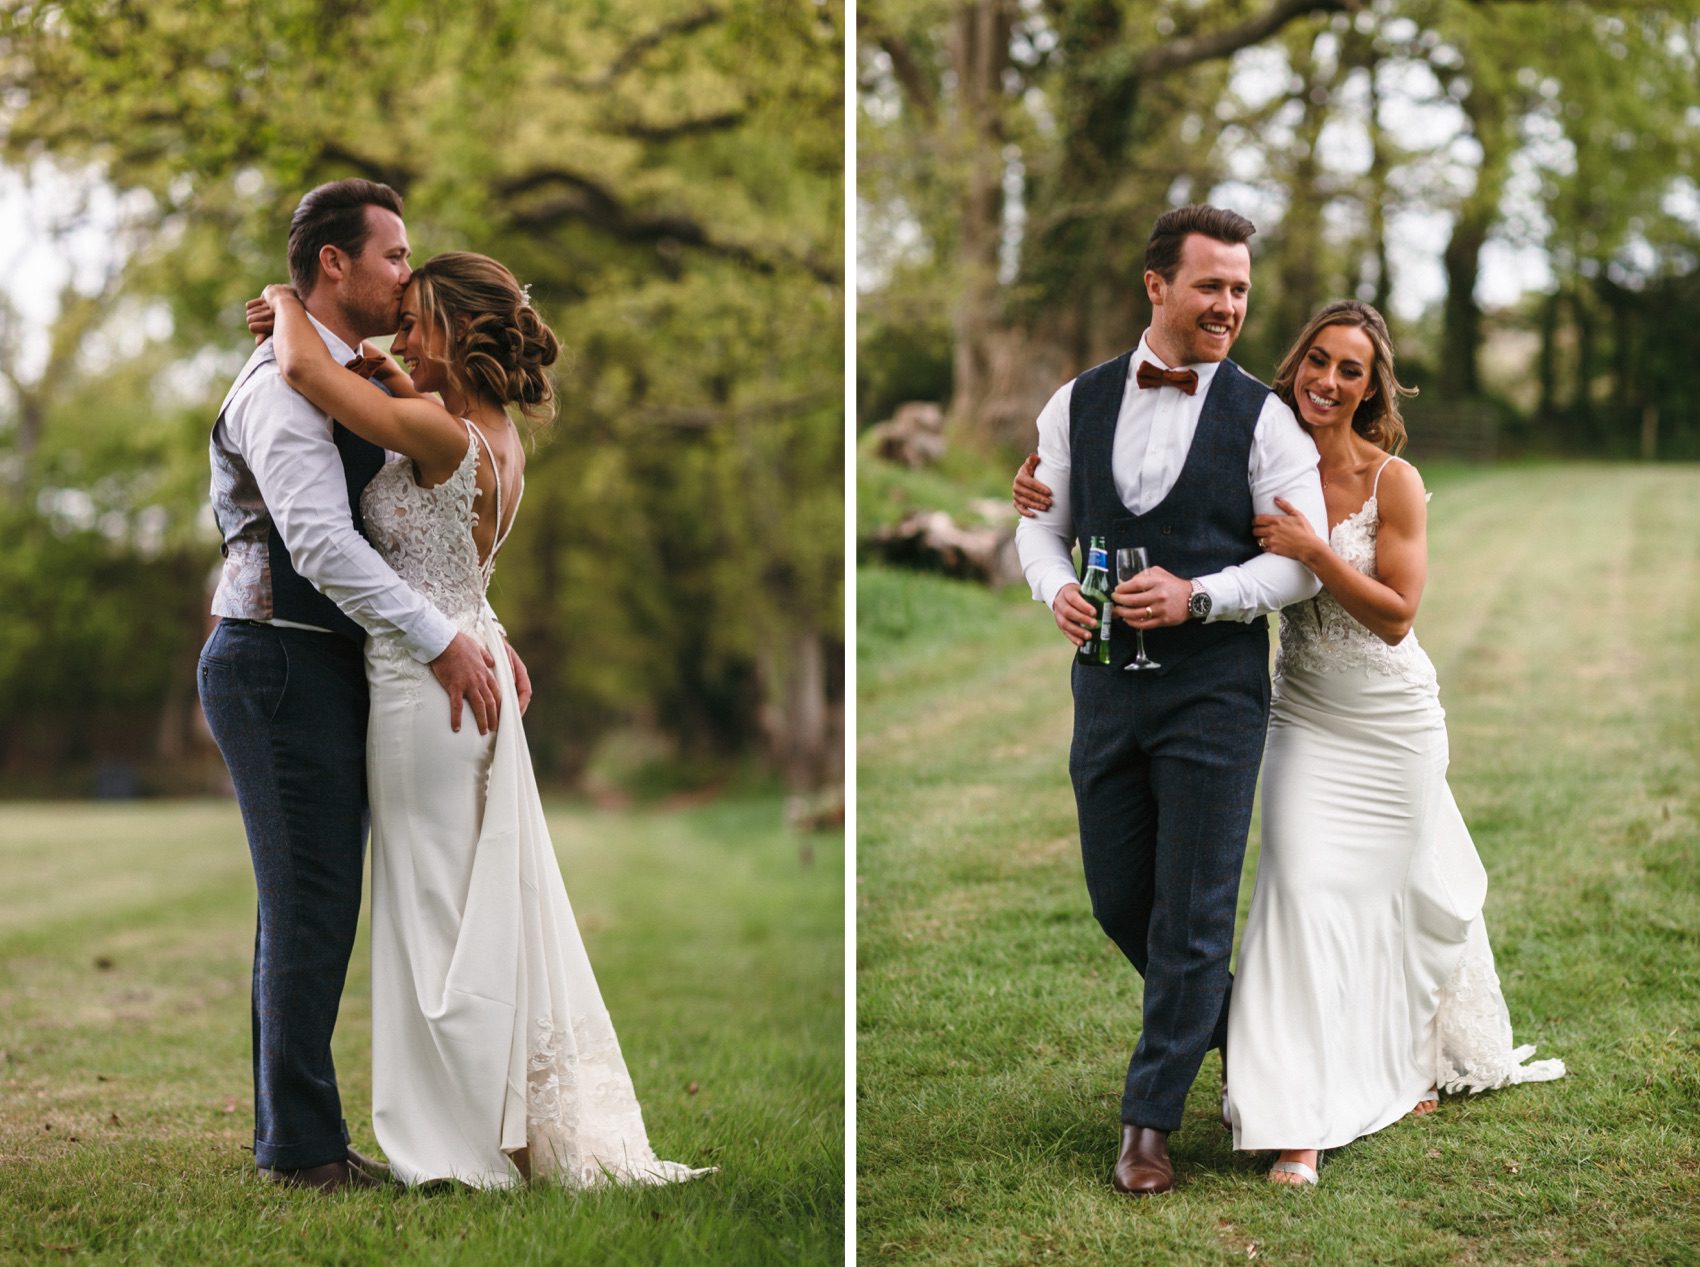 Creative and relaxed wedding photographer in Devon - Freckle Photography